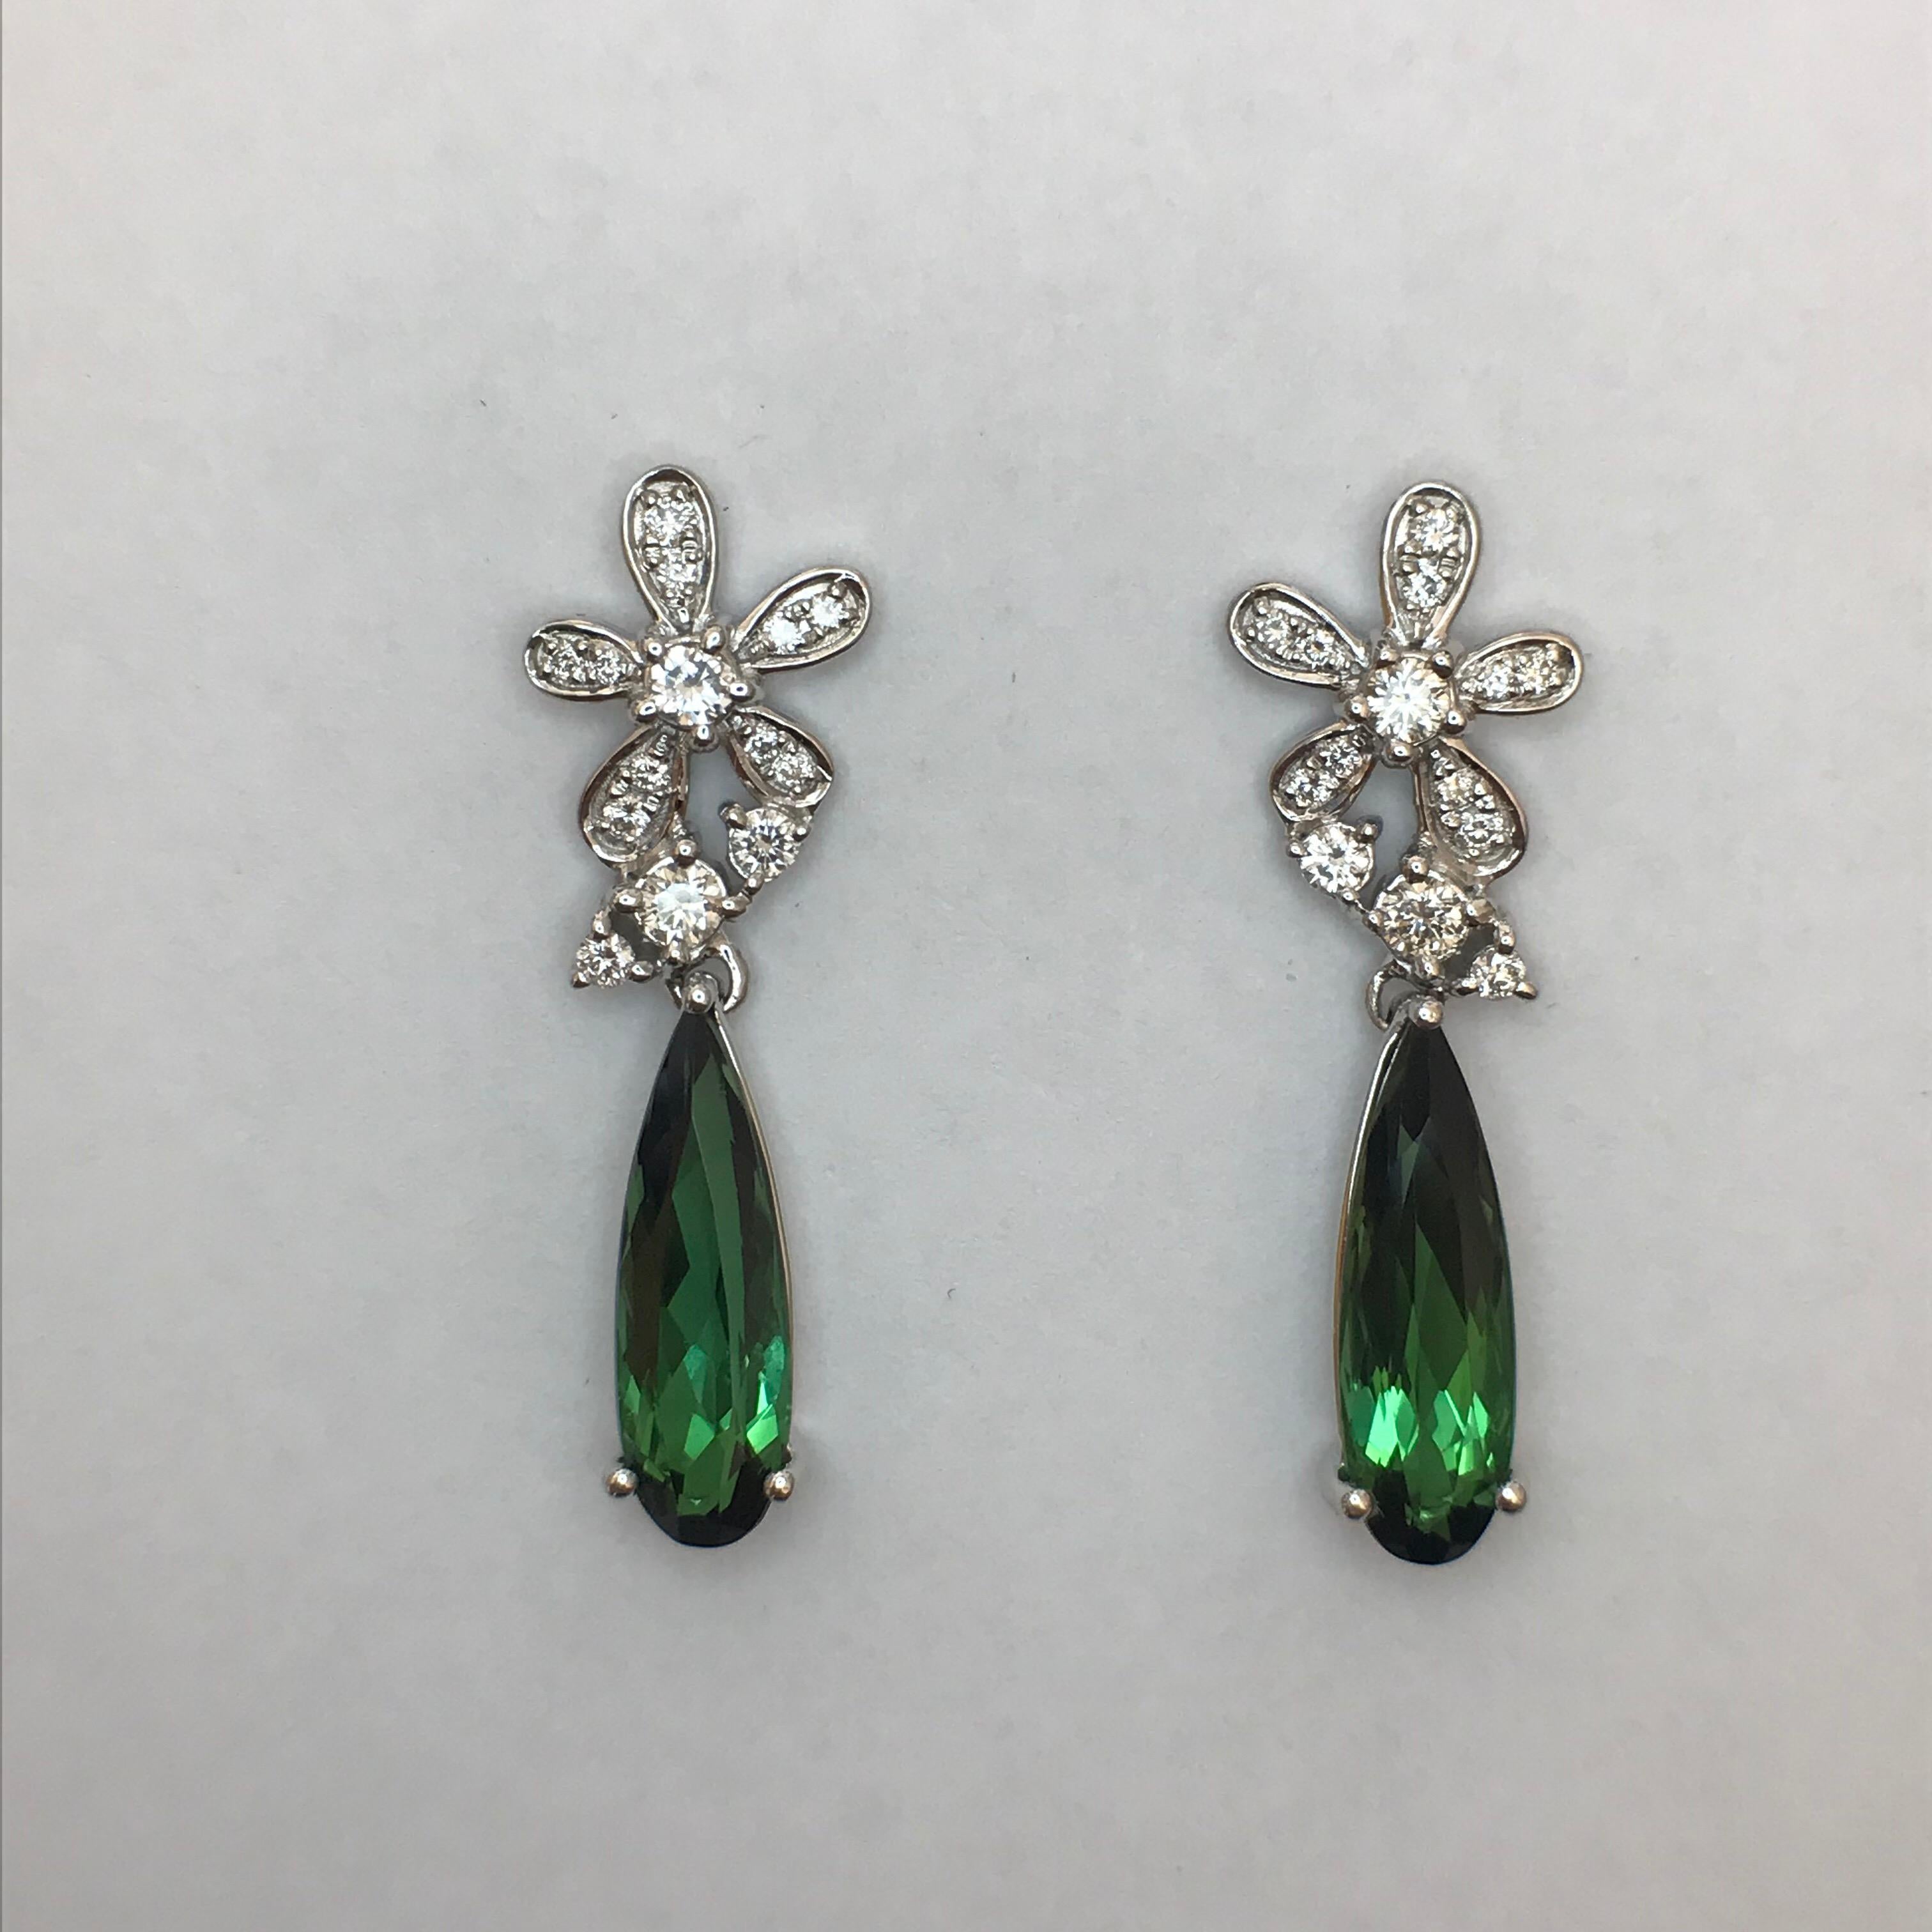 Playful flower and bud motifs composed of diamonds suspend elongated green tourmaline drops in these earrings that can be worn day or night.

Elongated Pear-Shaped Green Tourmalines: 3.47cts. Total Weight
Round Brilliant-Cut Diamonds: 0.51ct. Total